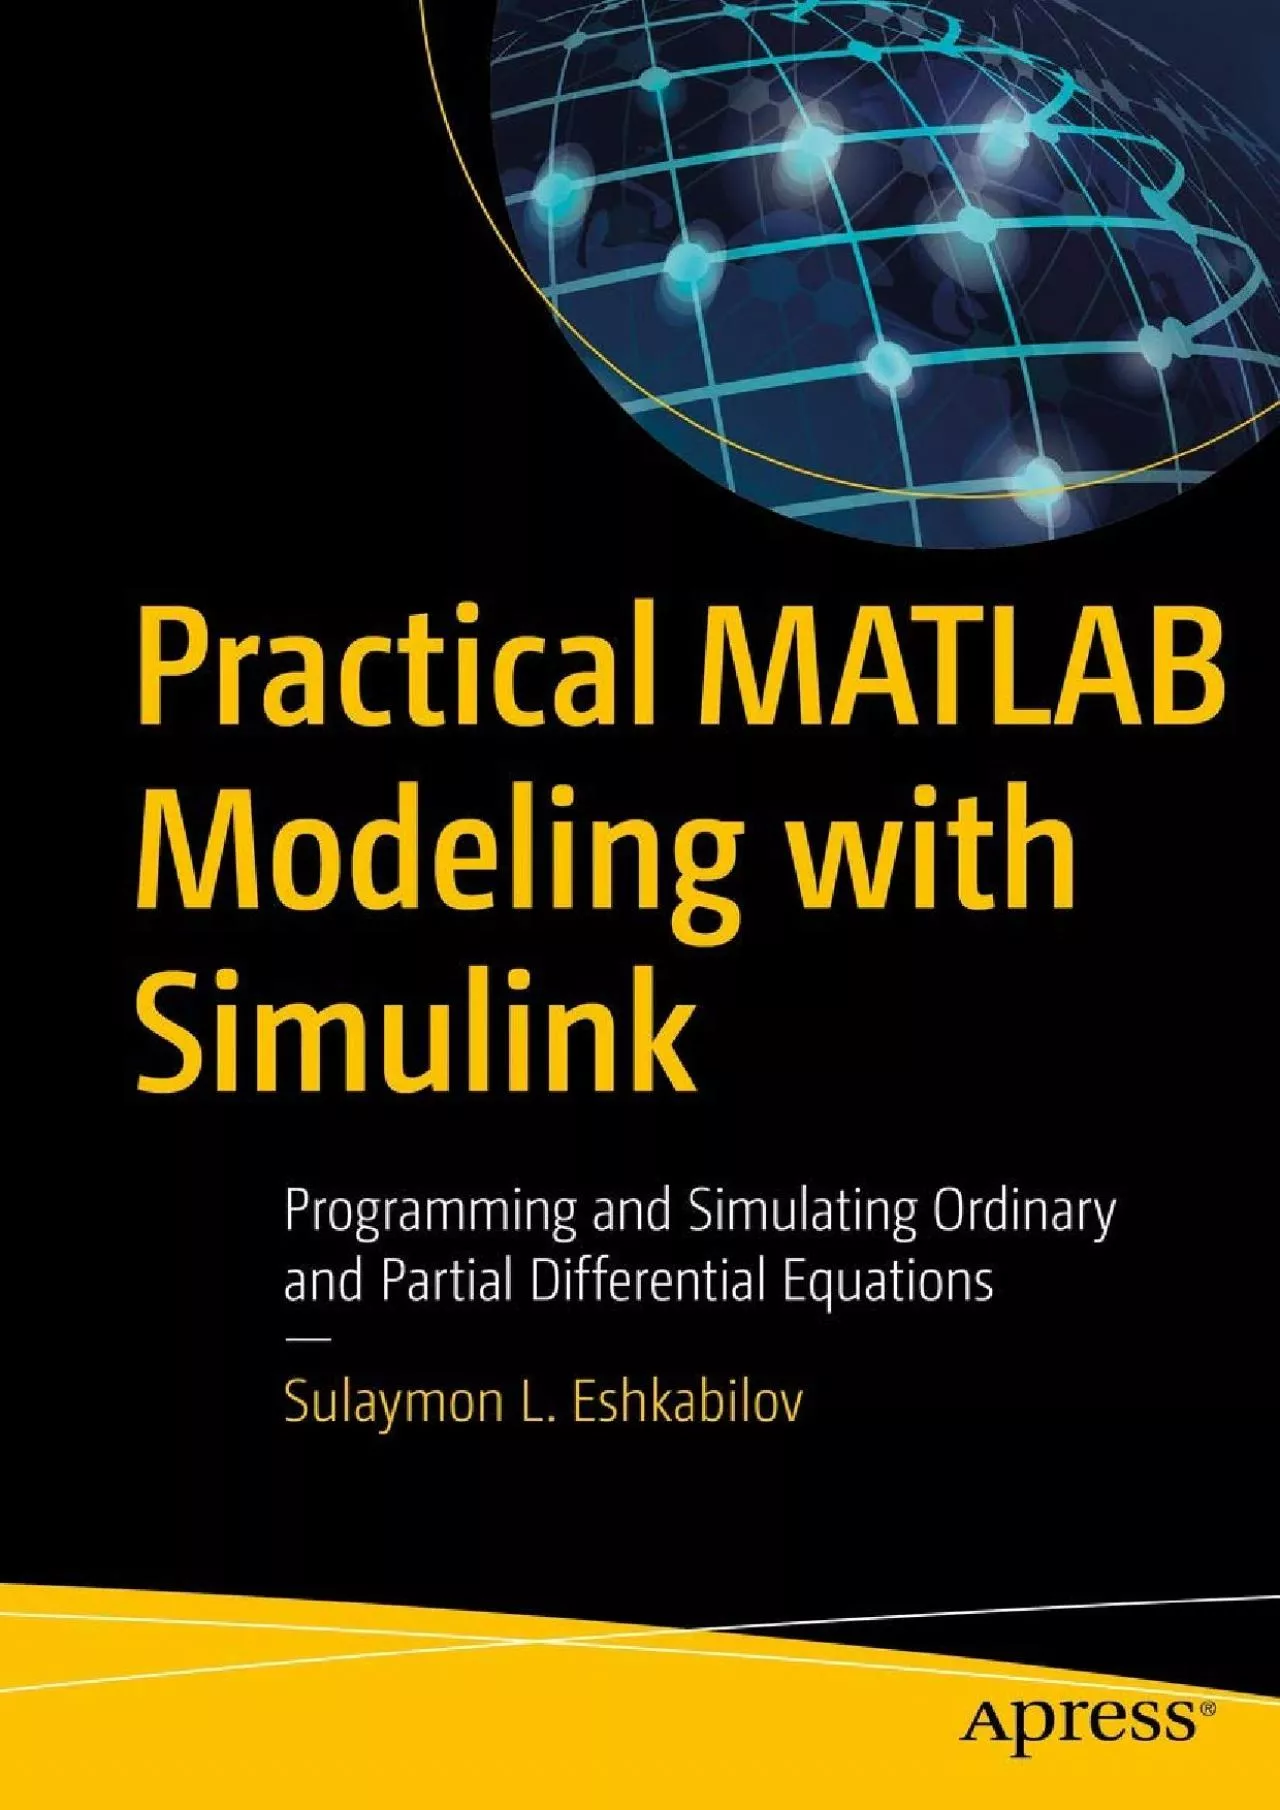 [eBOOK]-Practical MATLAB Modeling with Simulink: Programming and Simulating Ordinary and